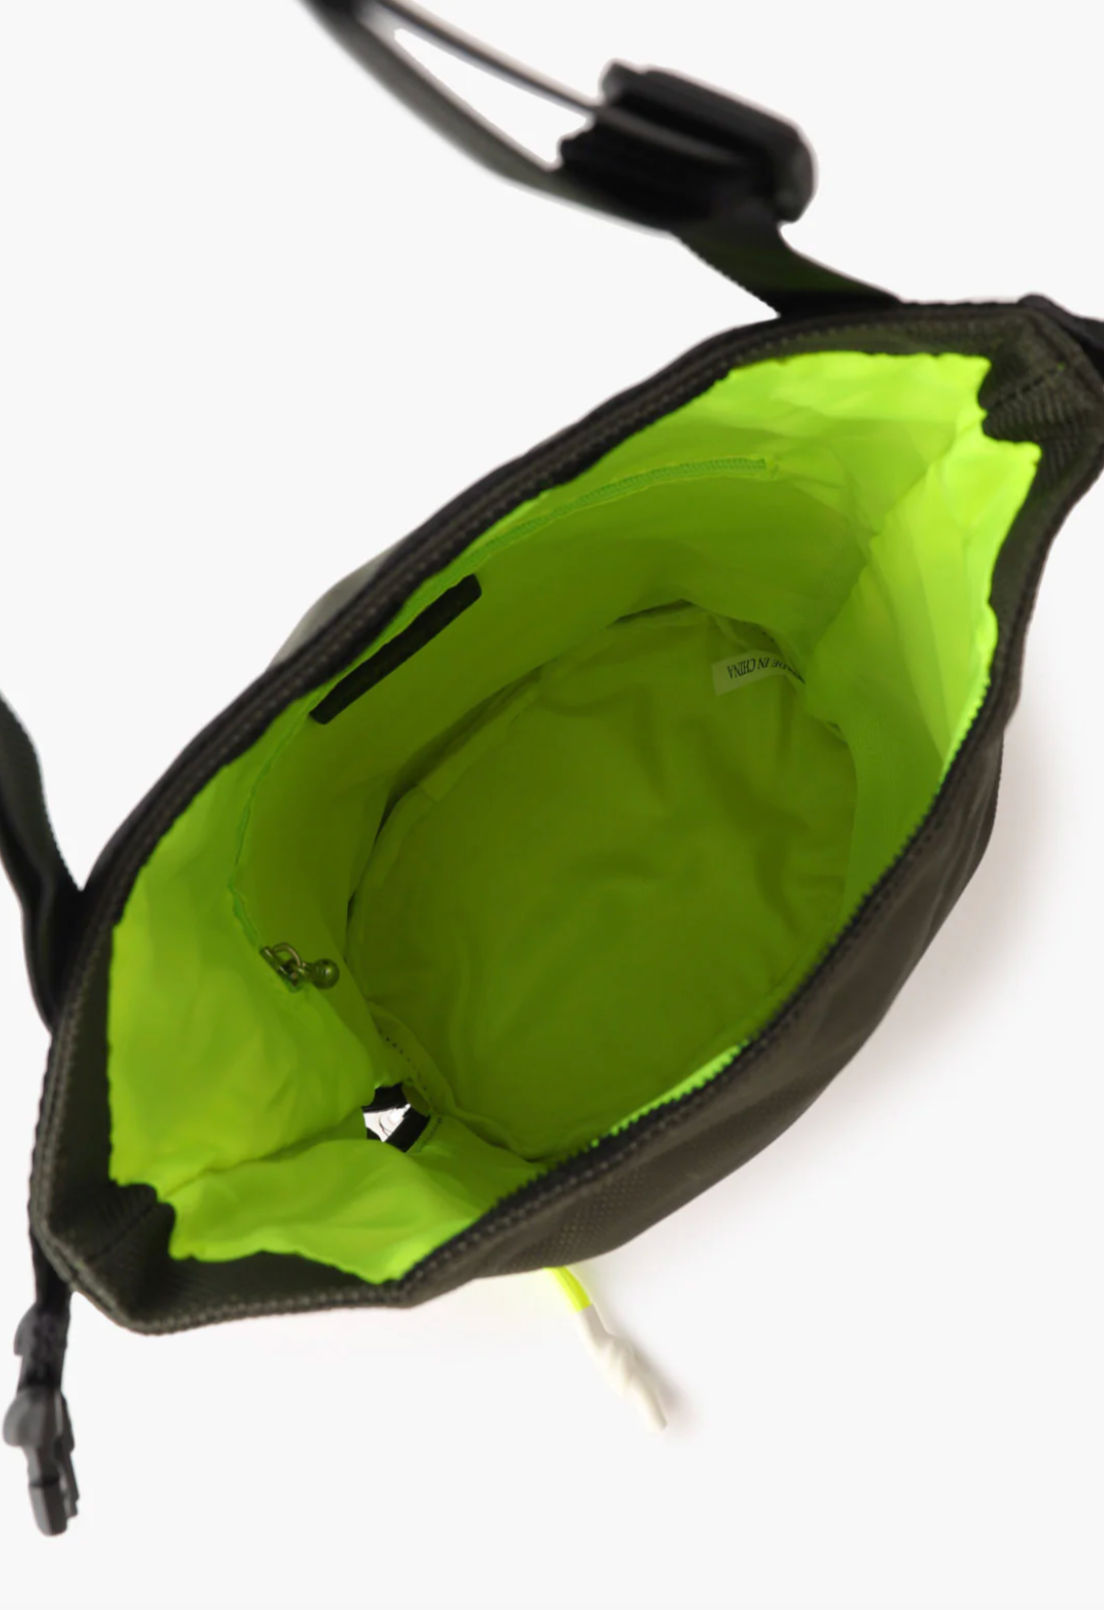 The Anyone Bucket Bag, open shows a neon green and large capacity, side zipper pocket